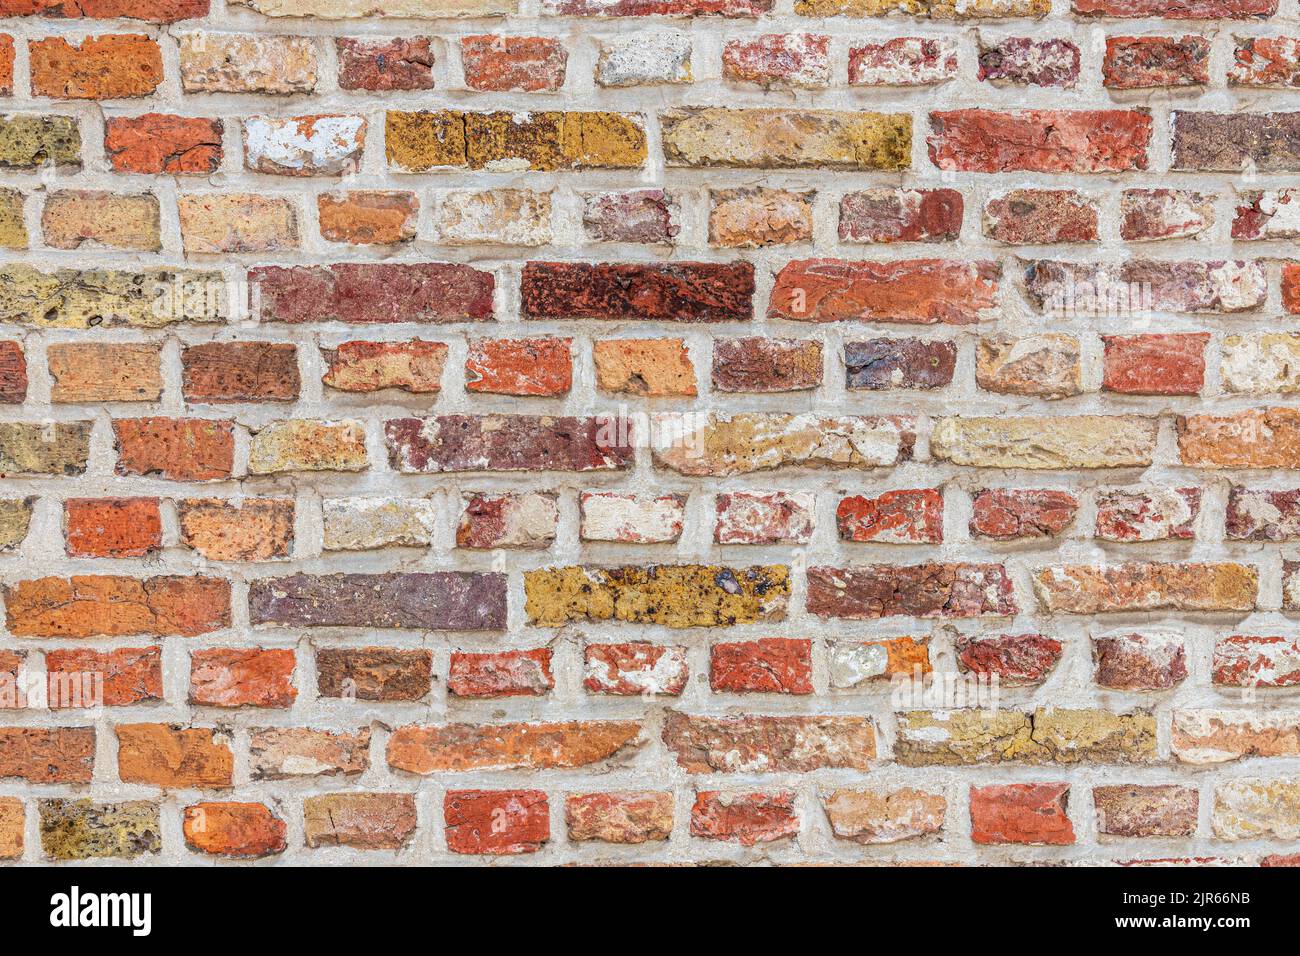 Unusual variant of English Bond brickwork with alternate rows of headers and stretchers (using reused bricks?) in Bruges, Belgium Stock Photo